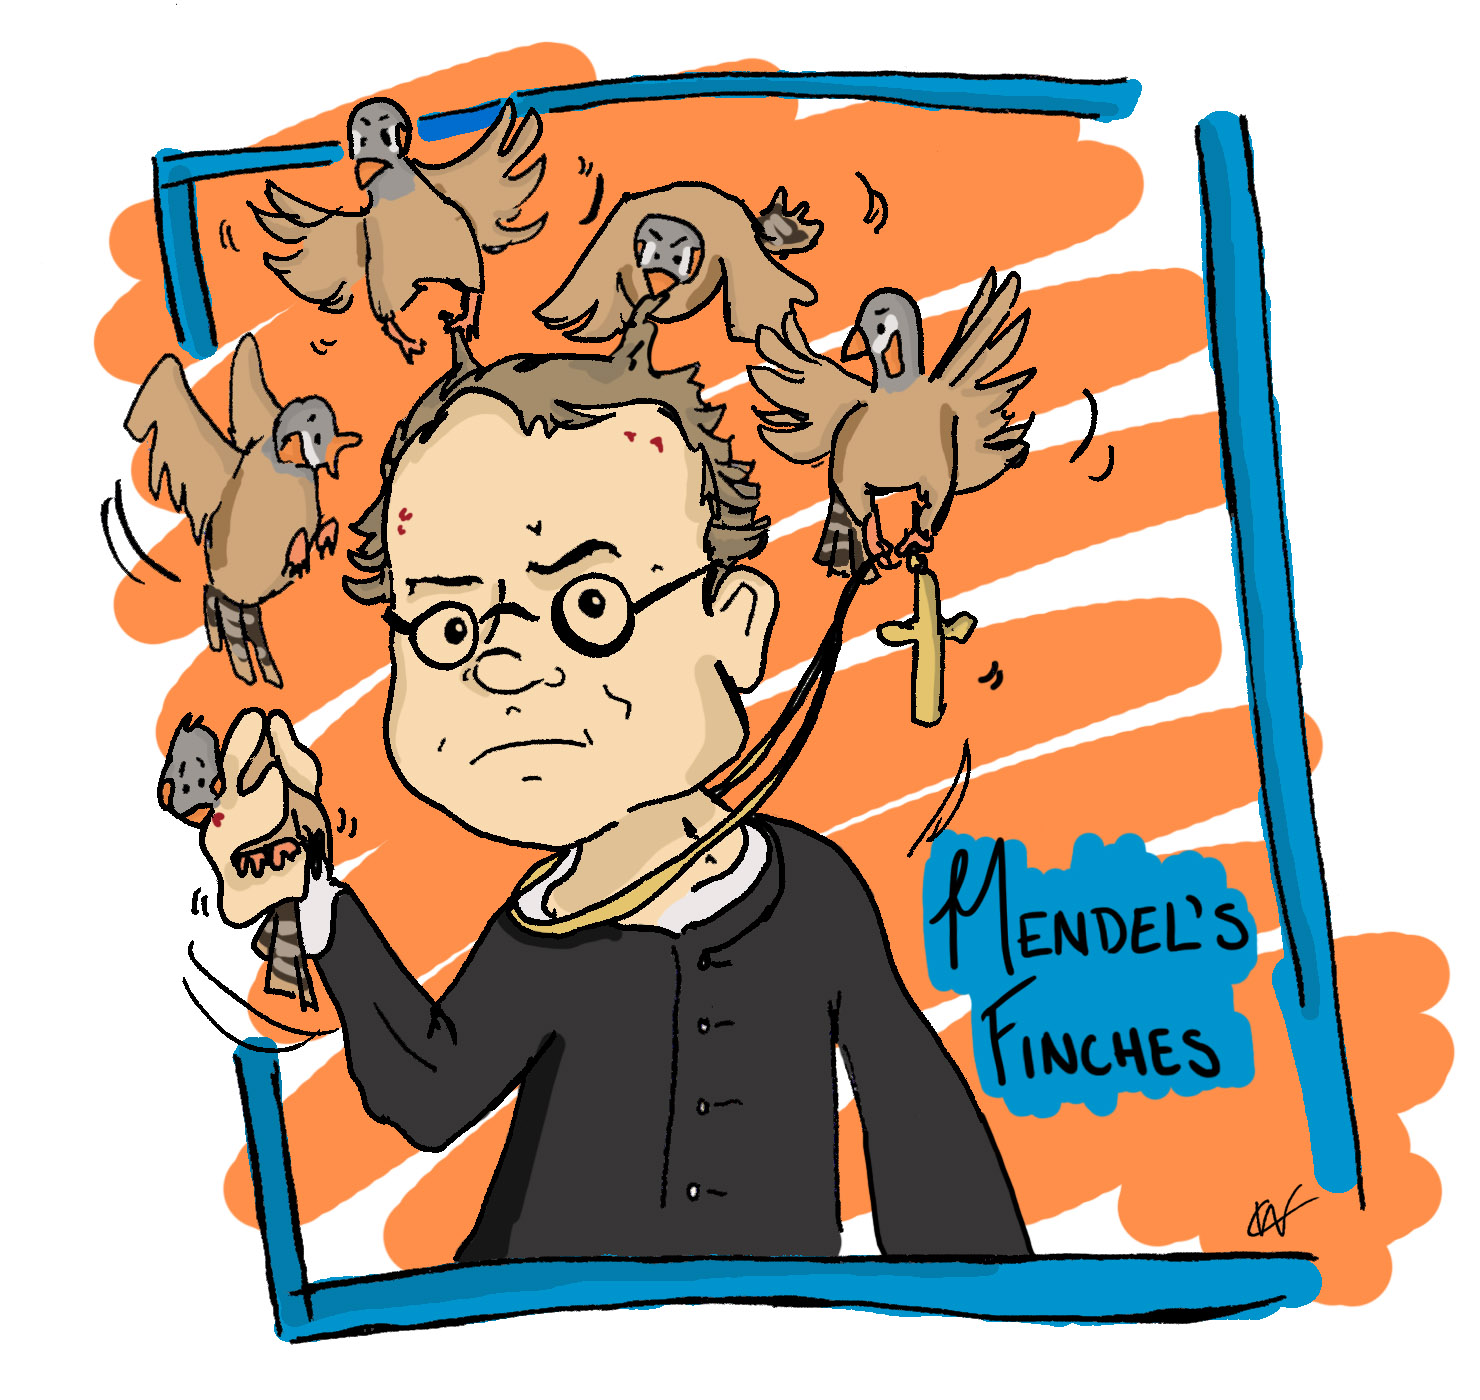 Mendel's Finches